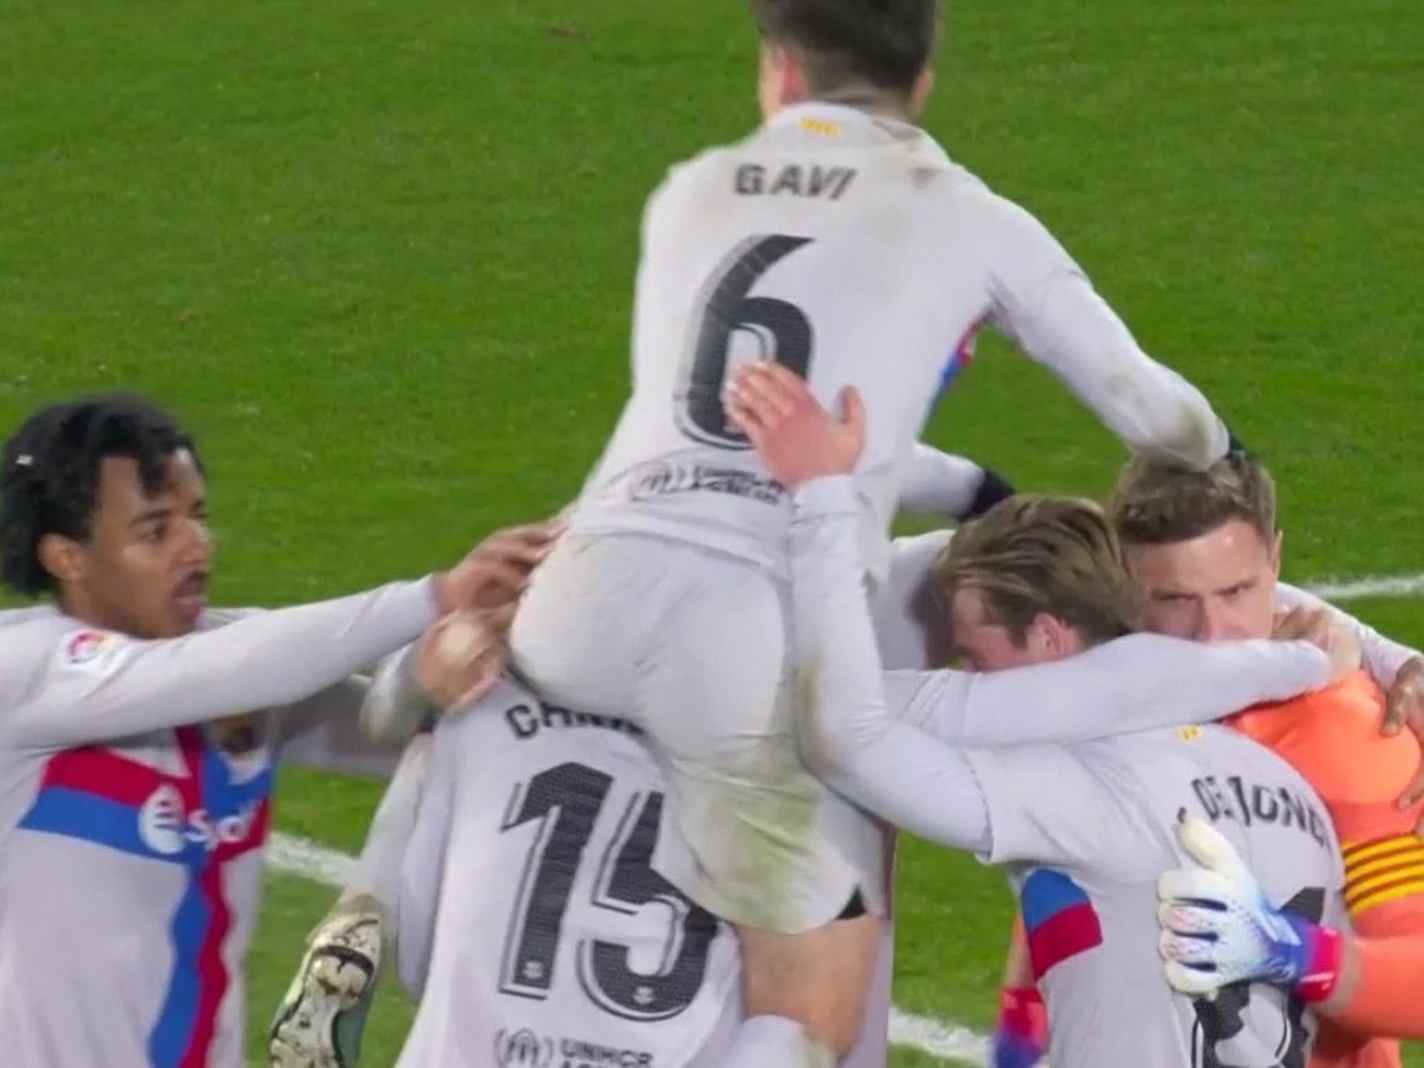 Did You See That: Gavi Launches Himself Onto Andreas Christensen At Full Time